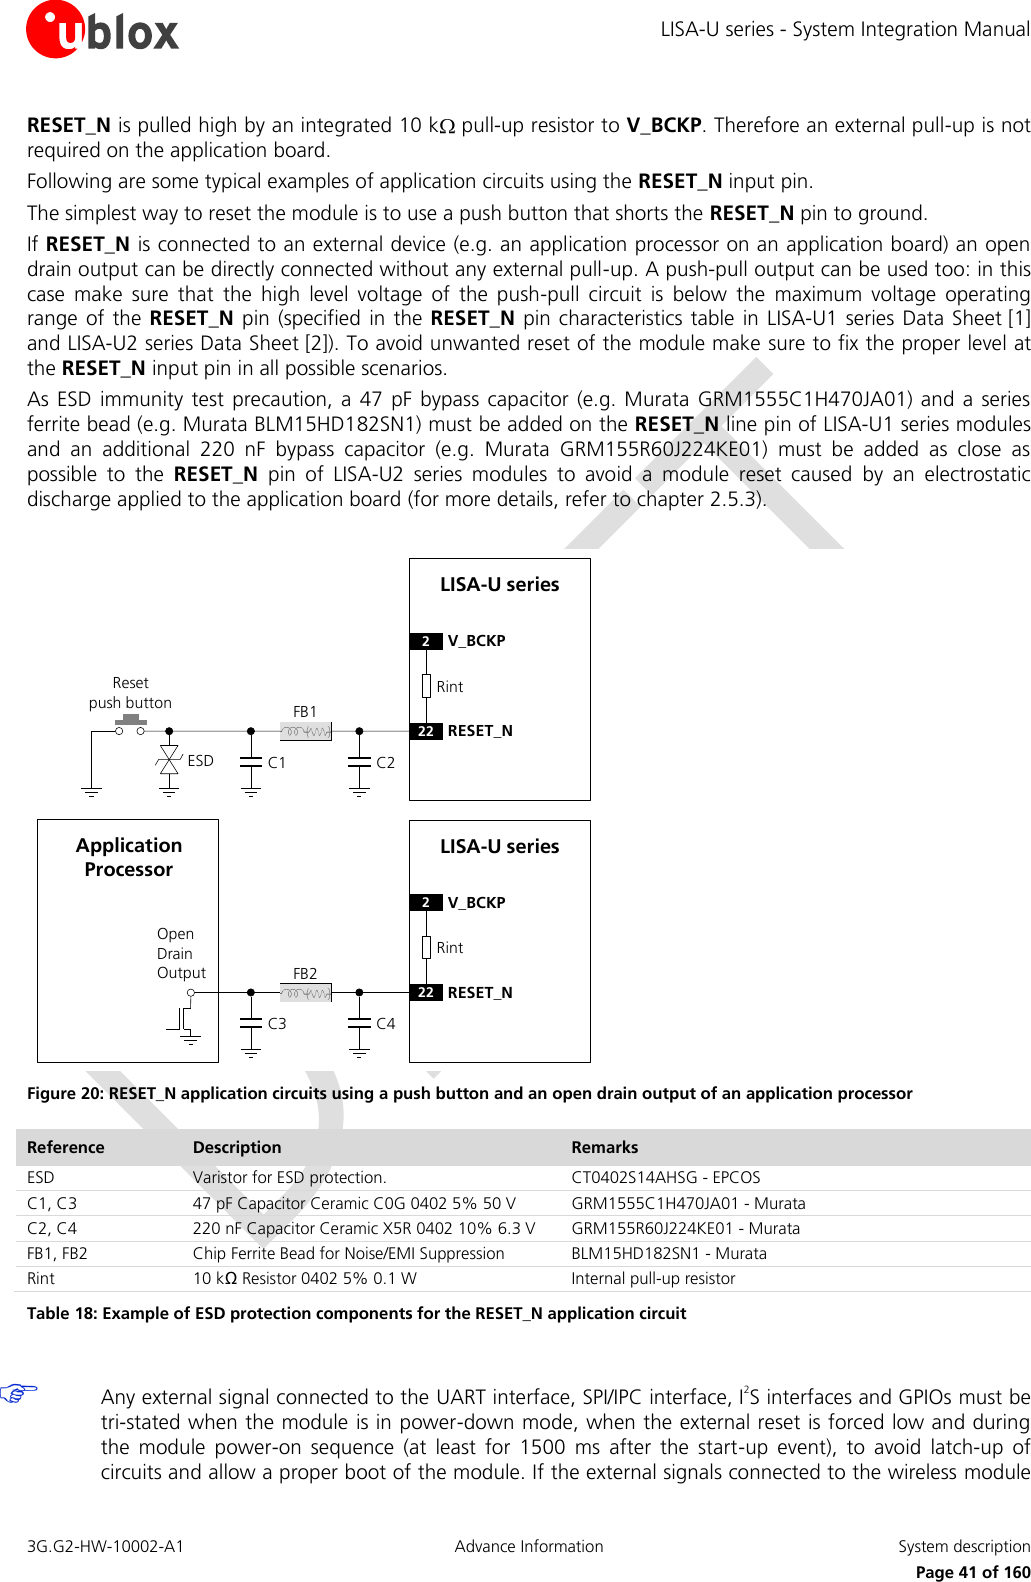 LISA-U series - System Integration Manual 3G.G2-HW-10002-A1  Advance Information  System description      Page 41 of 160 RESET_N is pulled high by an integrated 10 k  pull-up resistor to V_BCKP. Therefore an external pull-up is not required on the application board. Following are some typical examples of application circuits using the RESET_N input pin. The simplest way to reset the module is to use a push button that shorts the RESET_N pin to ground. If RESET_N is connected to an external device (e.g. an application processor on an application board) an open drain output can be directly connected without any external pull-up. A push-pull output can be used too: in this case  make  sure  that  the  high  level  voltage  of  the  push-pull  circuit  is  below  the  maximum  voltage  operating range of the RESET_N  pin (specified  in the  RESET_N pin characteristics table  in LISA-U1 series  Data Sheet [1] and LISA-U2 series Data Sheet [2]). To avoid unwanted reset of the module make sure to fix the proper level at the RESET_N input pin in all possible scenarios. As ESD  immunity test  precaution,  a 47  pF  bypass capacitor  (e.g. Murata  GRM1555C1H470JA01) and a  series ferrite bead (e.g. Murata BLM15HD182SN1) must be added on the RESET_N line pin of LISA-U1 series modules and  an  additional  220  nF  bypass  capacitor  (e.g.  Murata  GRM155R60J224KE01)  must  be  added  as  close  as possible  to  the  RESET_N  pin  of  LISA-U2  series  modules  to  avoid  a  module  reset  caused  by  an  electrostatic discharge applied to the application board (for more details, refer to chapter 2.5.3).  LISA-U series2V_BCKP22 RESET_NReset     push buttonESDOpen Drain OutputApplication ProcessorLISA-U series2V_BCKP22 RESET_NRintRintFB1C1FB2C3C2C4 Figure 20: RESET_N application circuits using a push button and an open drain output of an application processor Reference Description Remarks ESD Varistor for ESD protection. CT0402S14AHSG - EPCOS C1, C3 47 pF Capacitor Ceramic C0G 0402 5% 50 V GRM1555C1H470JA01 - Murata C2, C4 220 nF Capacitor Ceramic X5R 0402 10% 6.3 V GRM155R60J224KE01 - Murata FB1, FB2 Chip Ferrite Bead for Noise/EMI Suppression BLM15HD182SN1 - Murata Rint 10 kΩ Resistor 0402 5% 0.1 W Internal pull-up resistor Table 18: Example of ESD protection components for the RESET_N application circuit   Any external signal connected to the UART interface, SPI/IPC interface, I2S interfaces and GPIOs must be tri-stated when the module is in power-down mode, when the external reset is forced low and during the  module  power-on  sequence  (at  least  for  1500  ms  after  the  start-up  event),  to  avoid  latch-up  of circuits and allow a proper boot of the module. If the external signals connected to the wireless module 